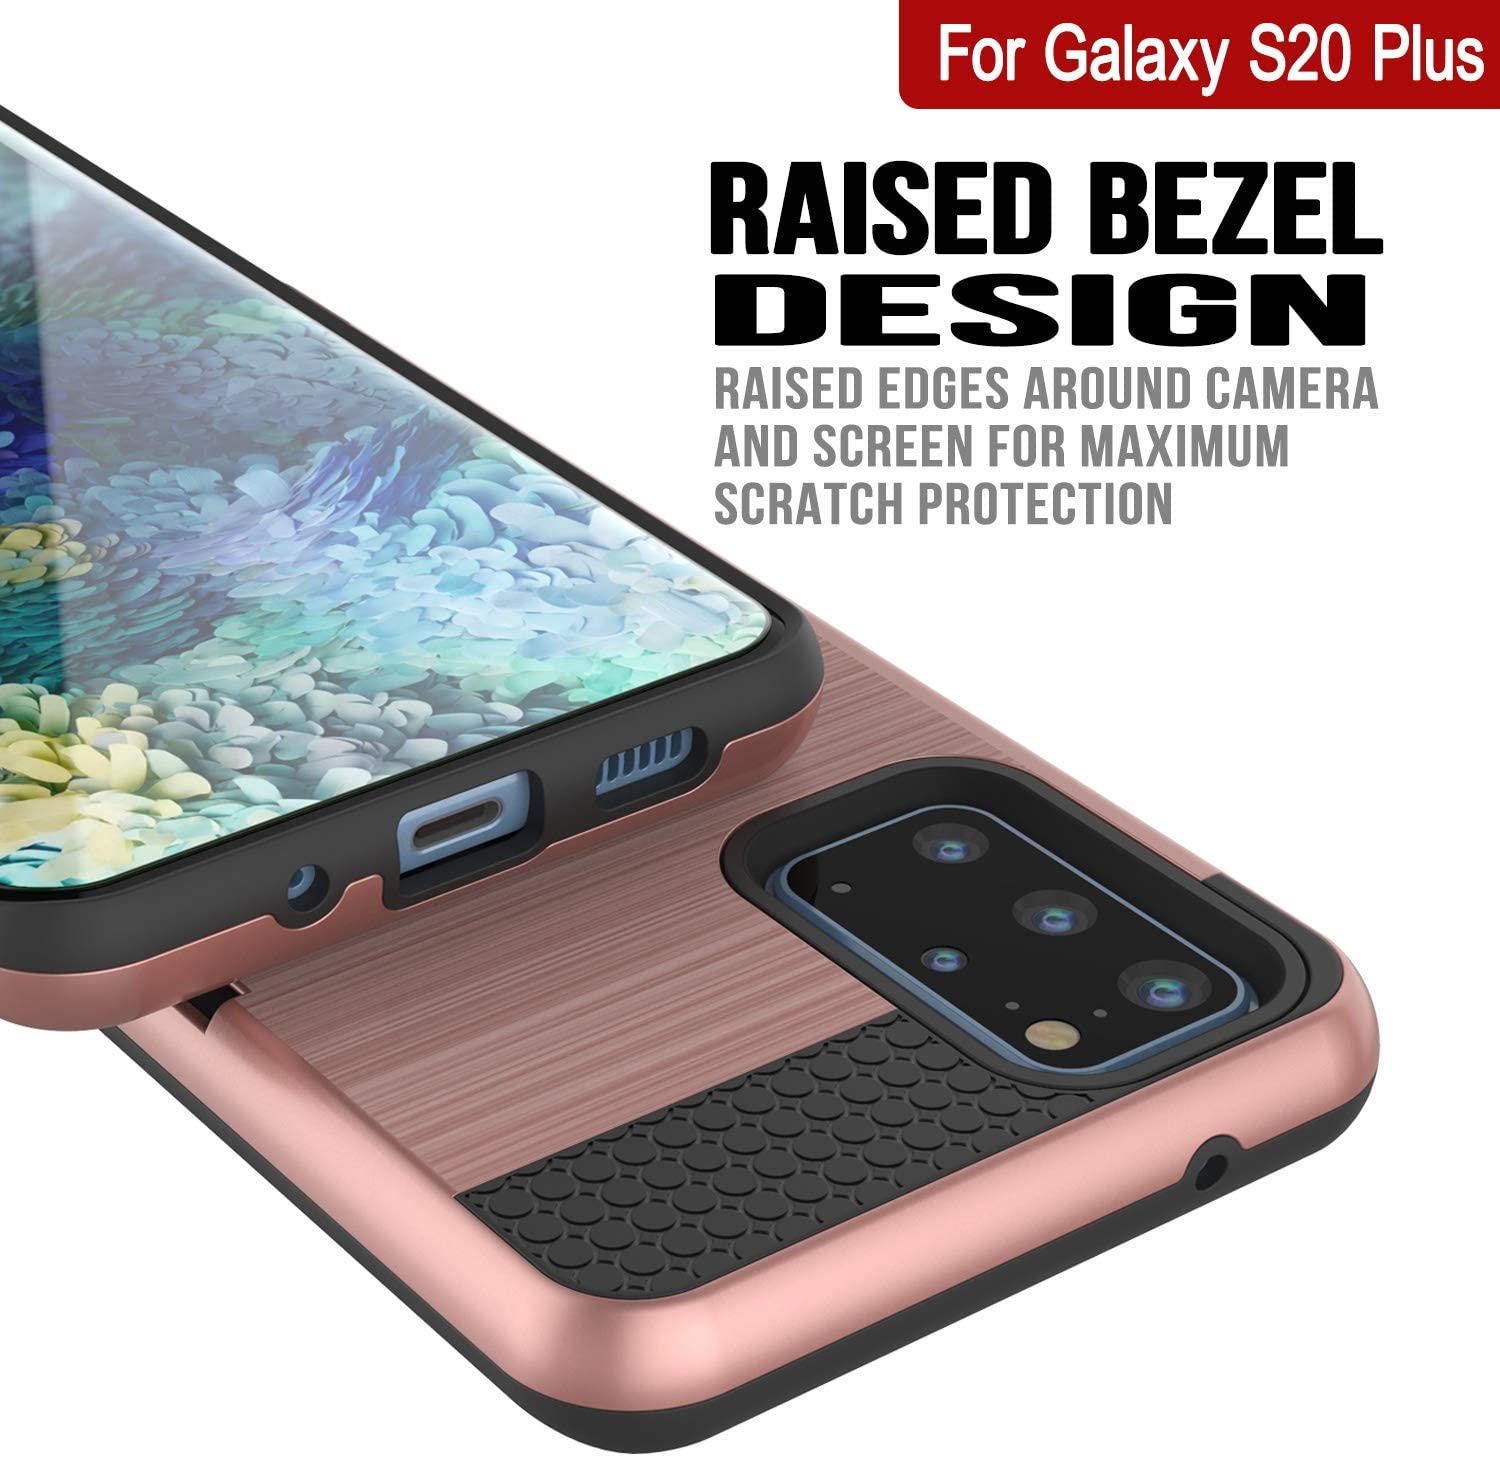 Galaxy S20+ Plus  Case, PUNKcase [SLOT Series] [Slim Fit] Dual-Layer Armor Cover w/Integrated Anti-Shock System, Credit Card Slot [Rose Gold]